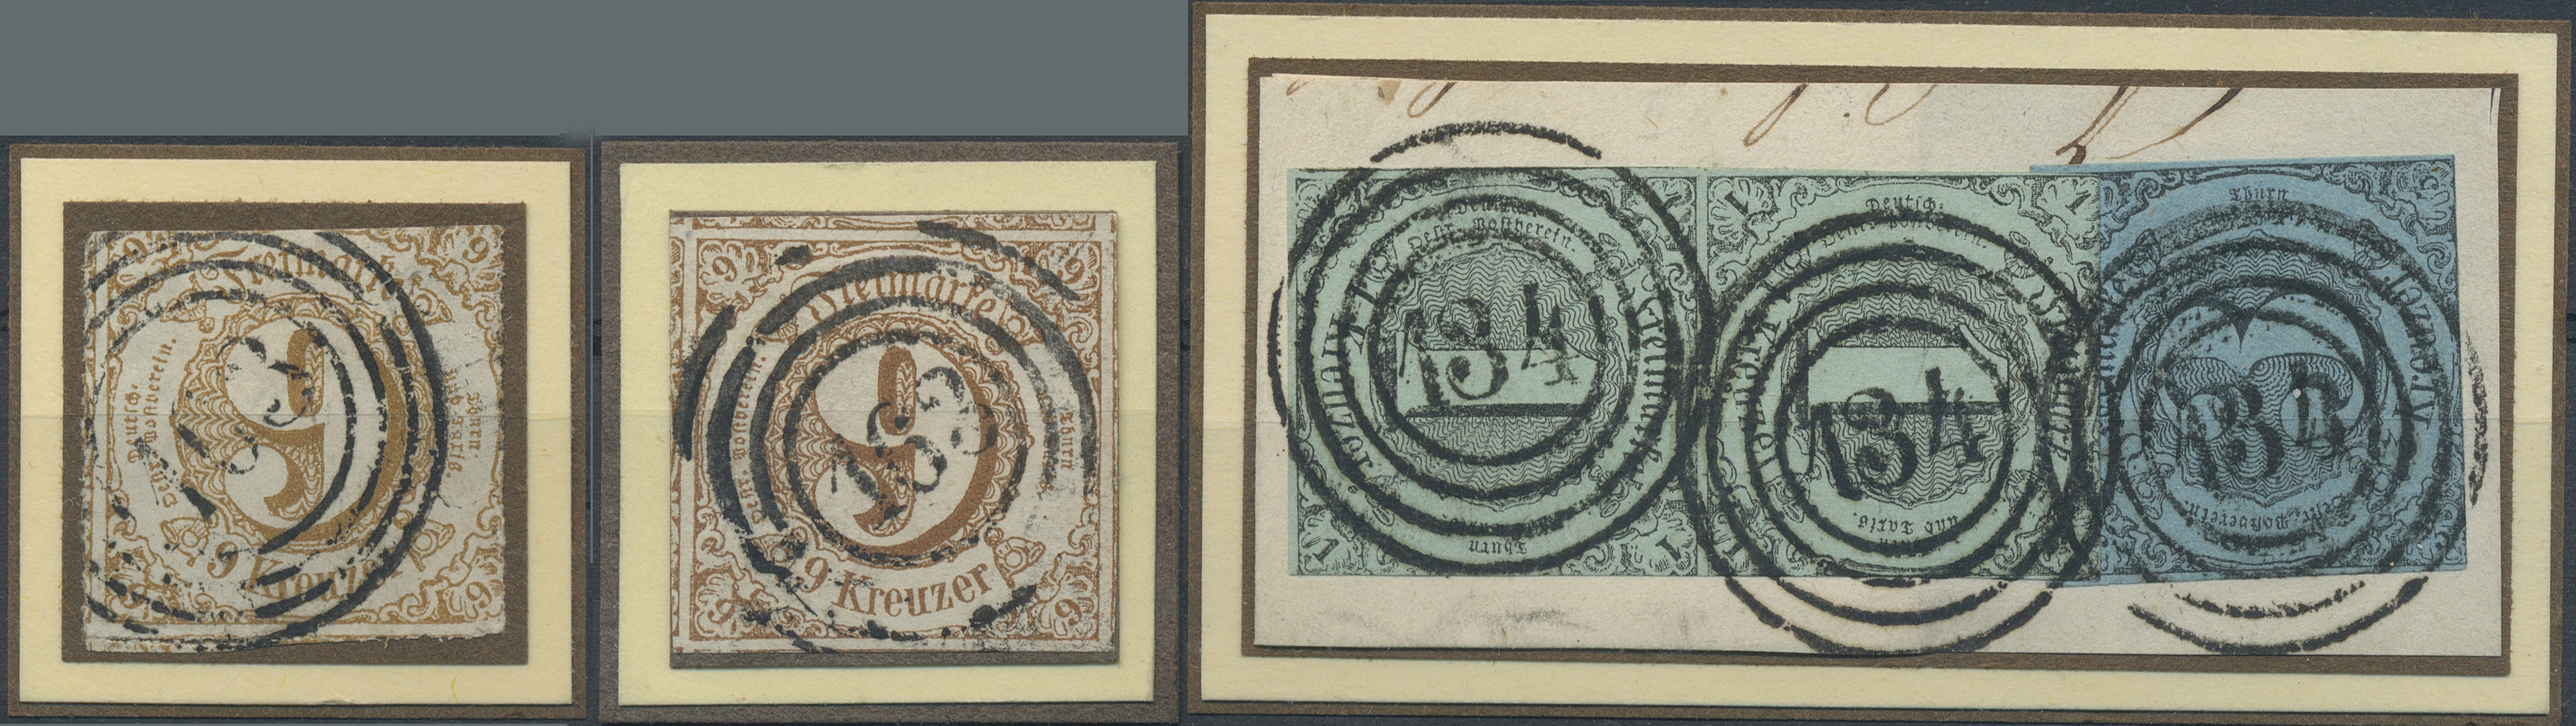 Lot 36302 - Thurn & Taxis - Marken und Briefe  -  Auktionshaus Christoph Gärtner GmbH & Co. KG Sale #44 Collections Germany